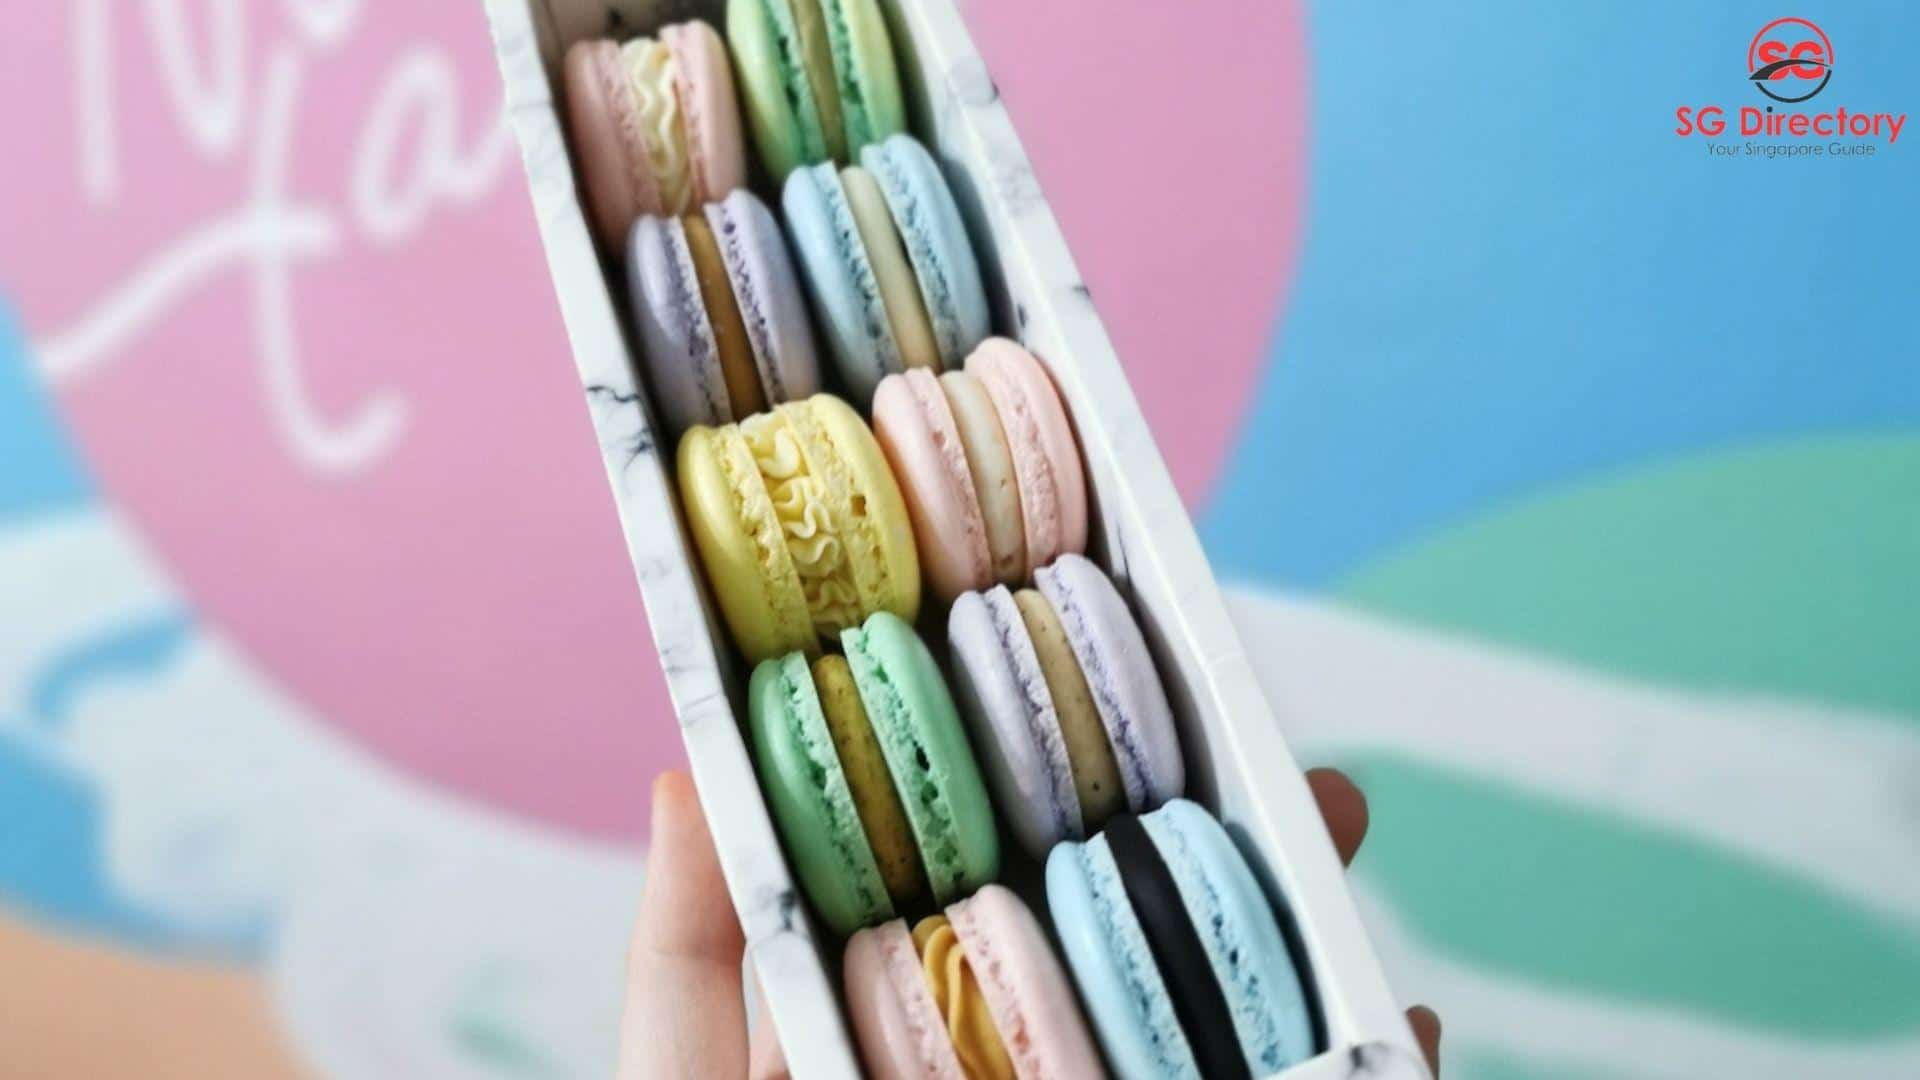 Nanatang: Bake house and studio is the best macaron in Singapore,
Best Macaron Singapore 2022,
Where to get macarons in Singapore,
Where to buy cheap macarons in singapore,
best macaron shop in singapore,
Top 5 macaron places in singapore,
what is the most famous macaron in singapore?